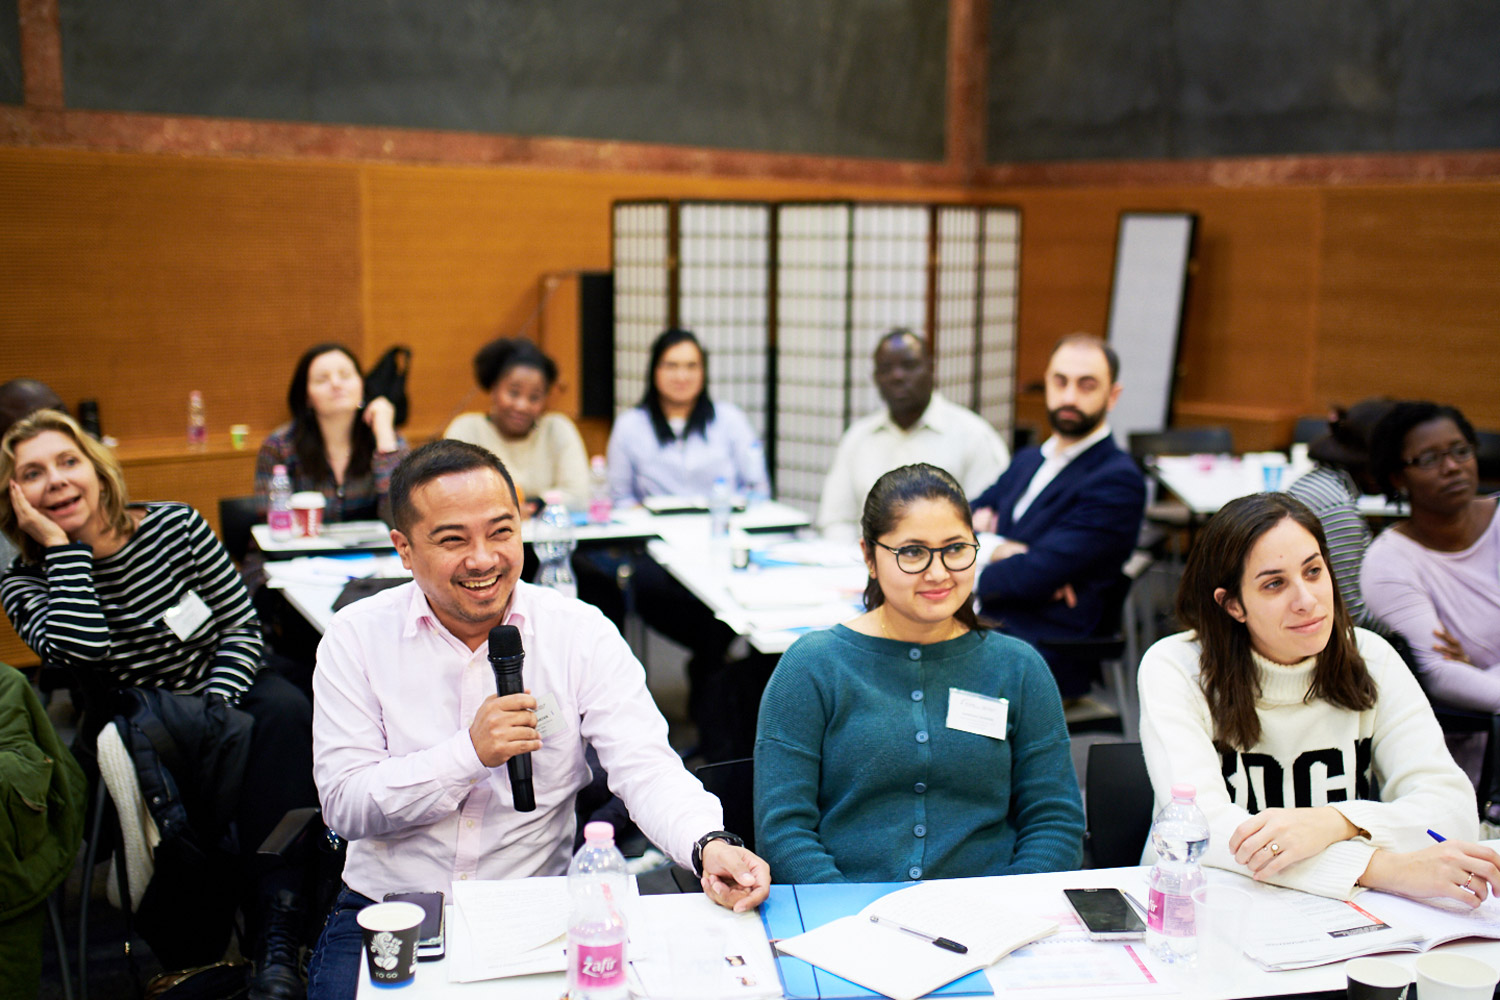 In 2018, members of the Grassroots Justice Network convened at Budapest’s Central European University for the fourth annual Legal Empowerment Leadership Course. Photo credit: Daniel Vegel